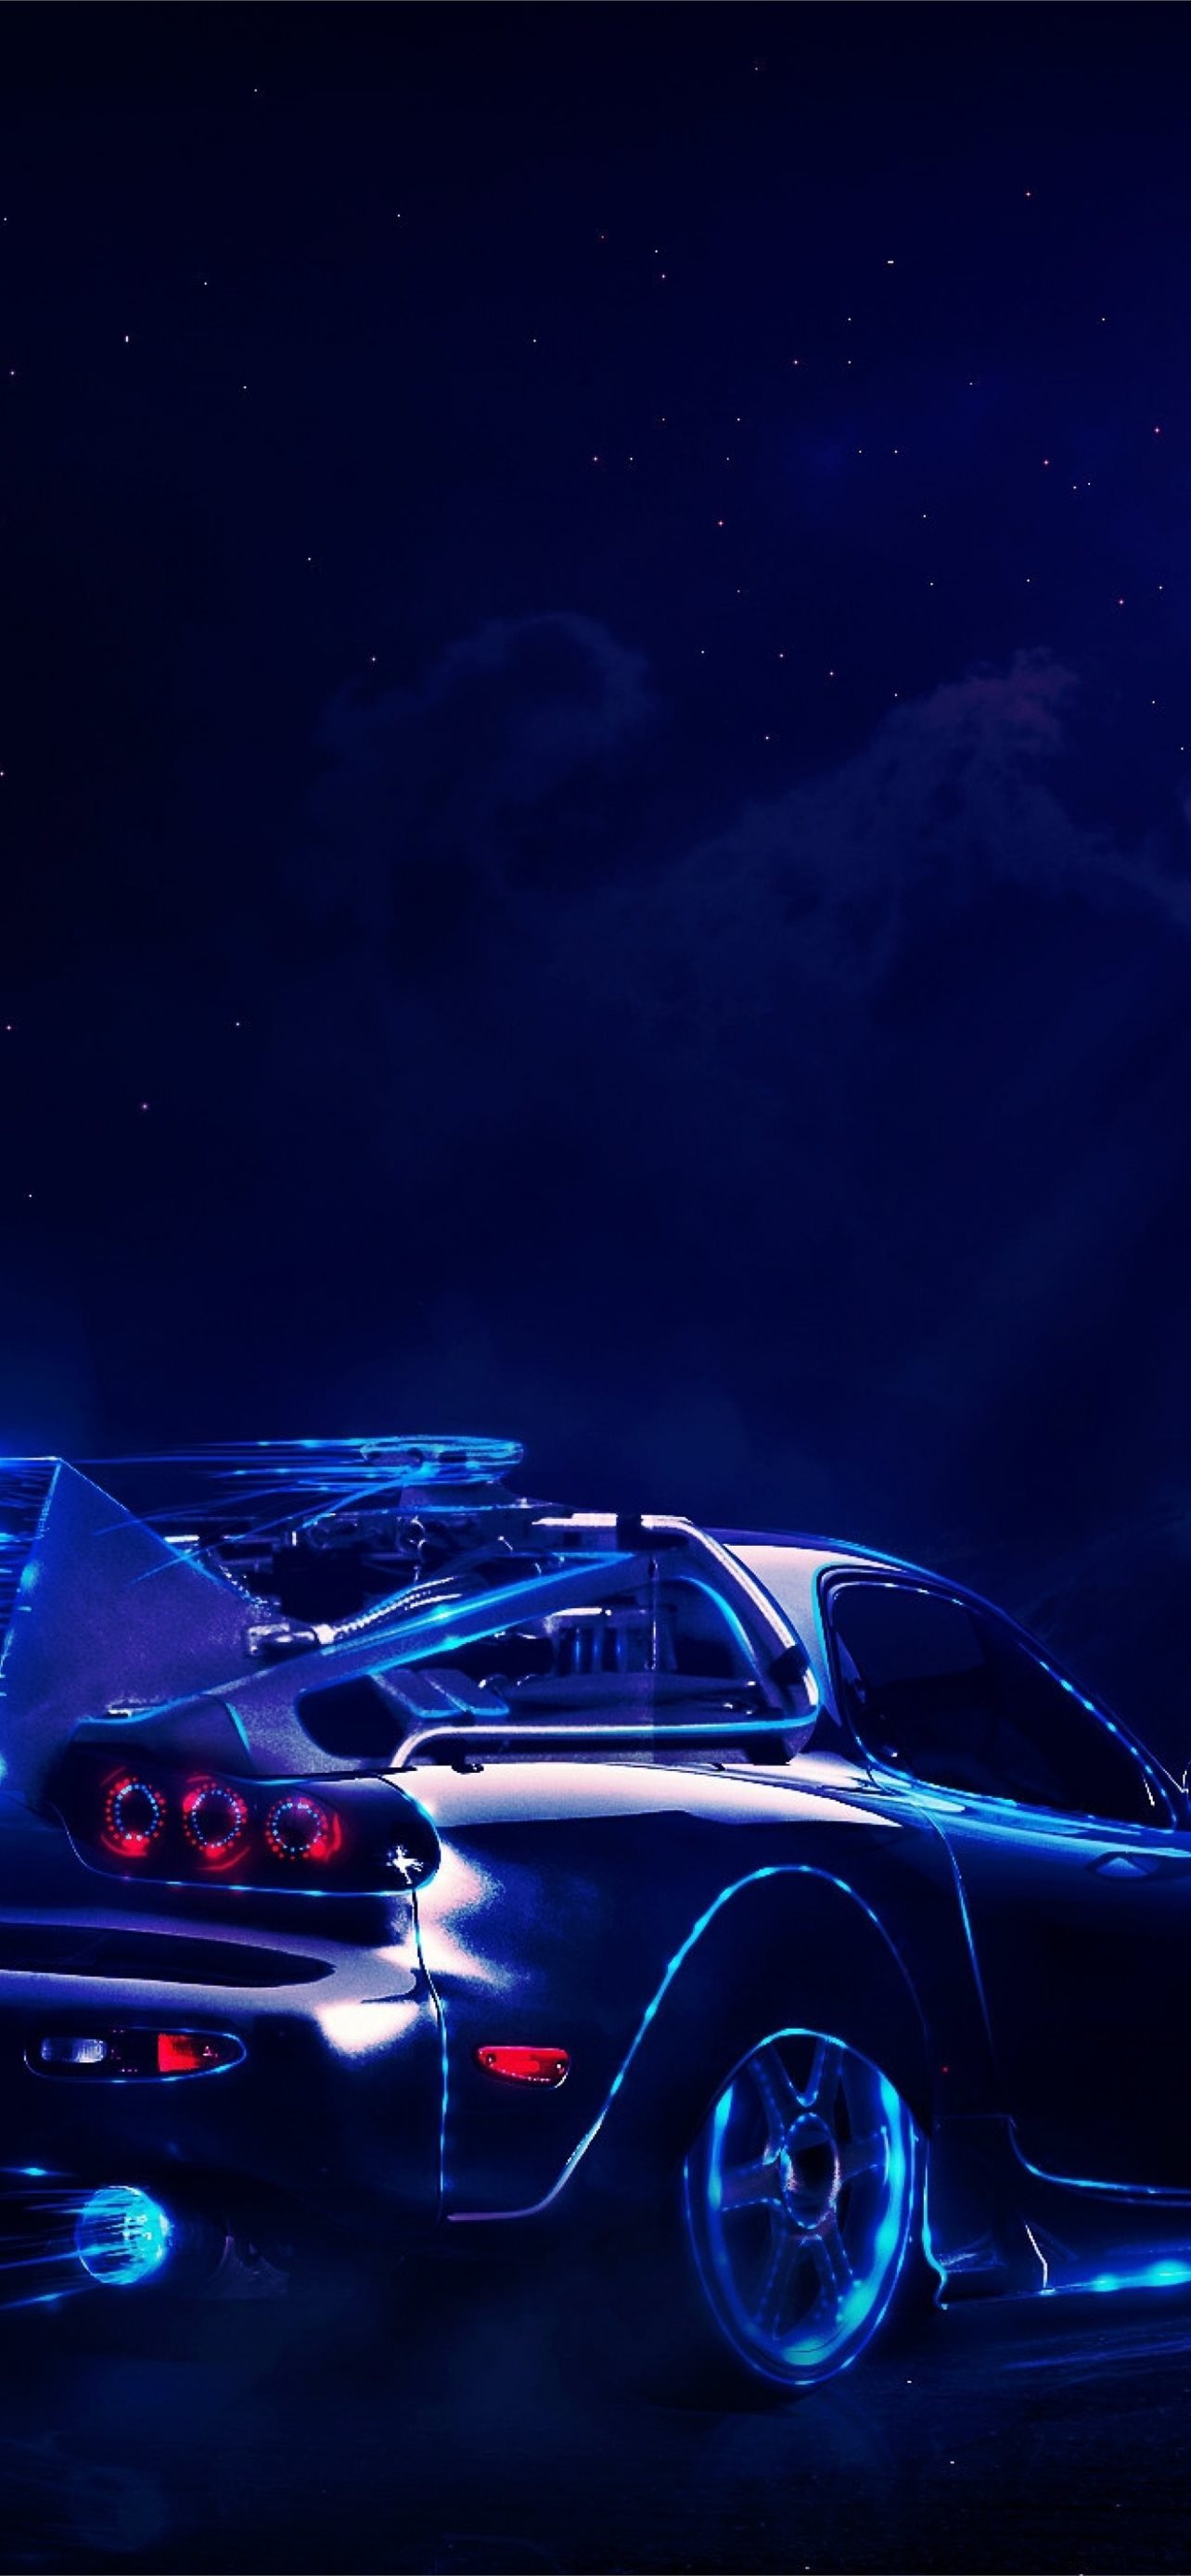 Back To The Future Mazda Rx7 Moon Digital Art 4k S Iphone Wallpapers Free Download